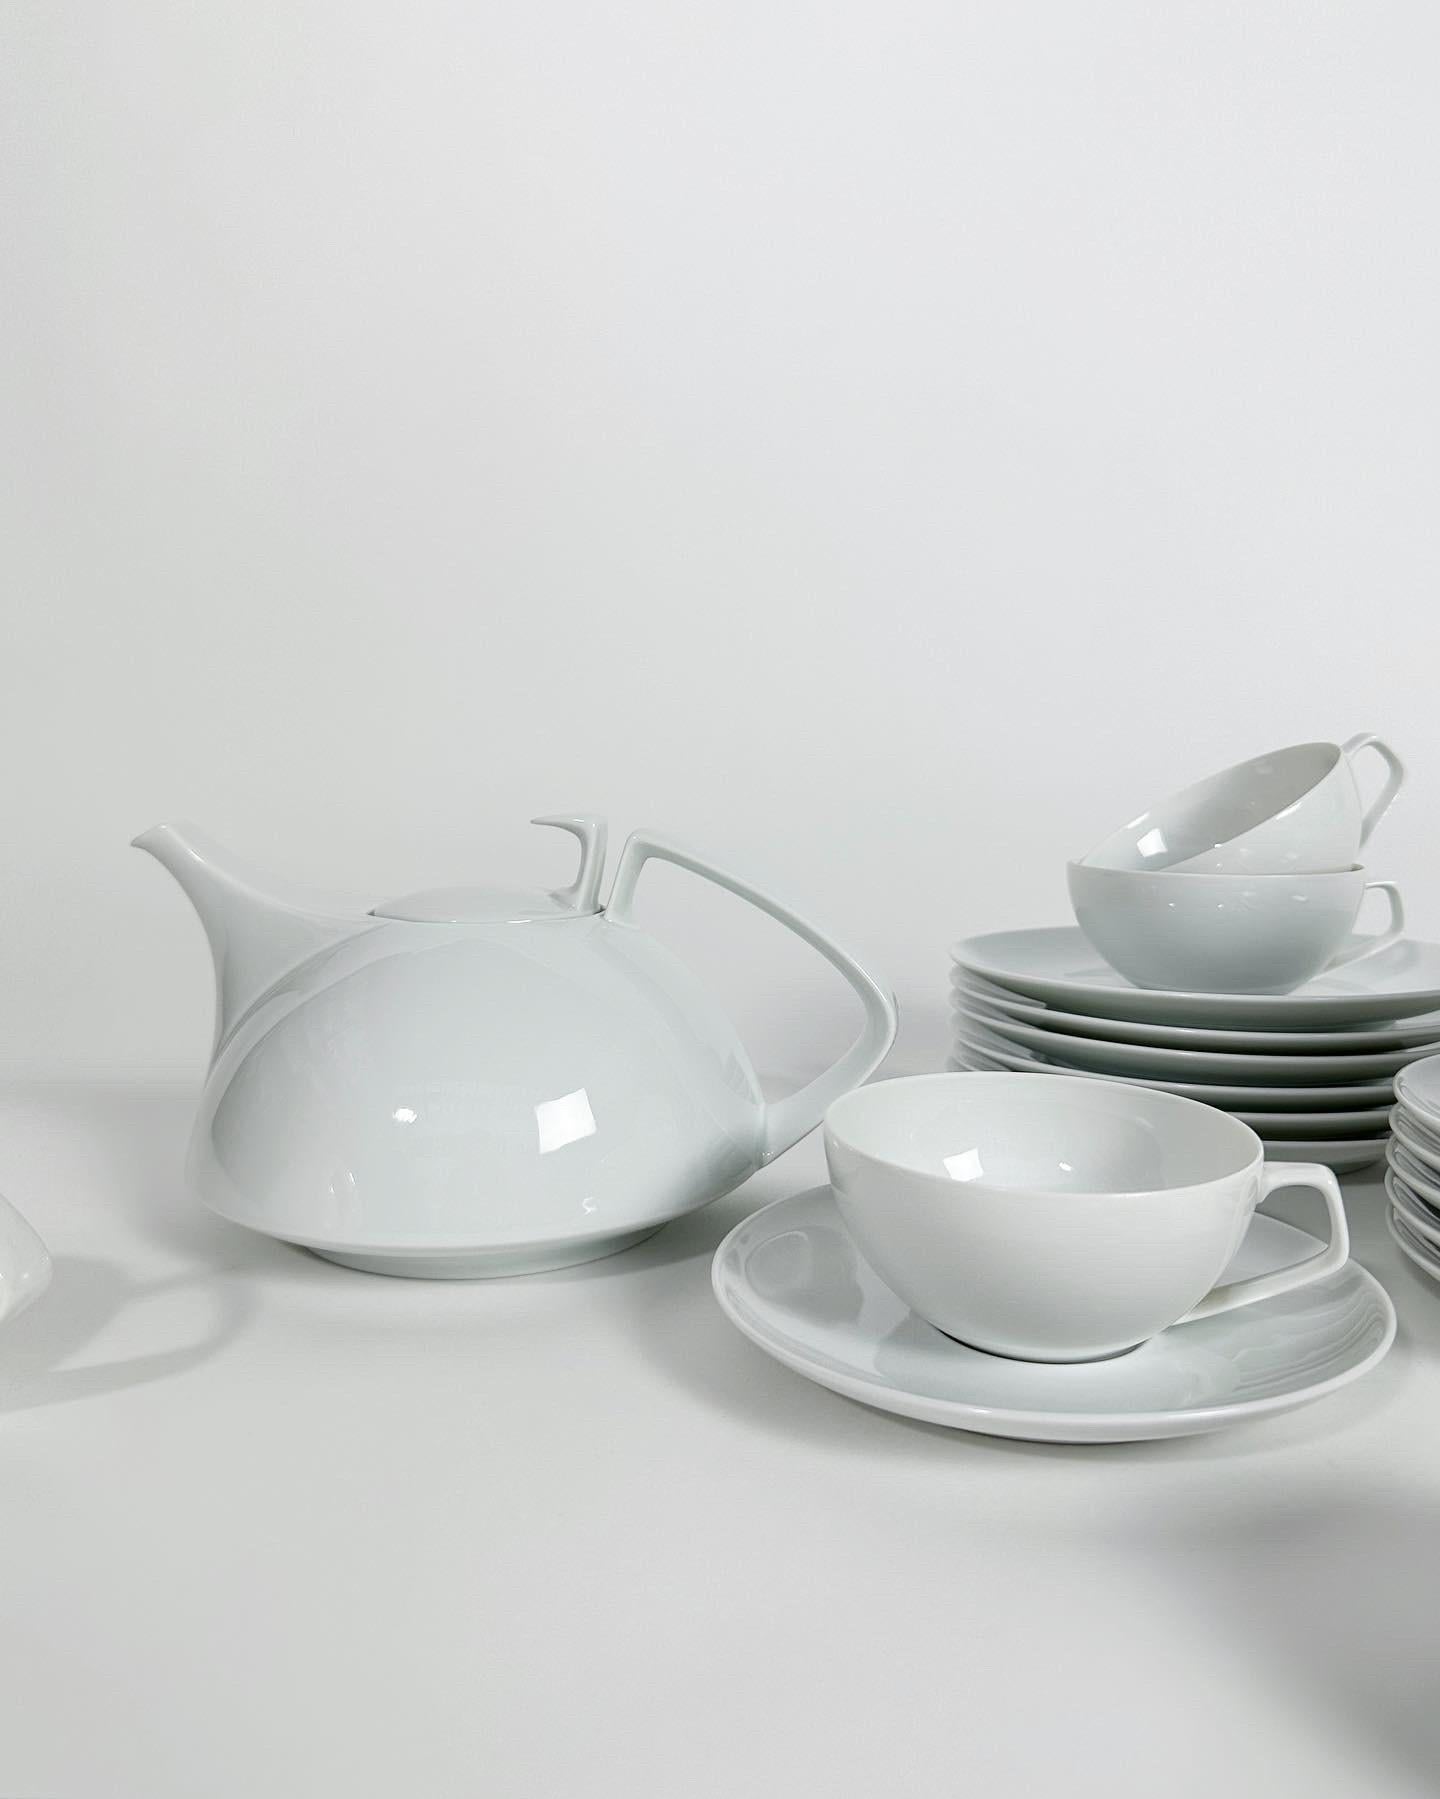 Tea set series ‚TAC’ designed by the Bauhaus founder Walter Gropius for Rosenthal in Germany, introduced in 1969 and produced in 1984.

Gropius was asked to to join The Architects Collaborative (TAC) as their senior partner in 1945. They represented